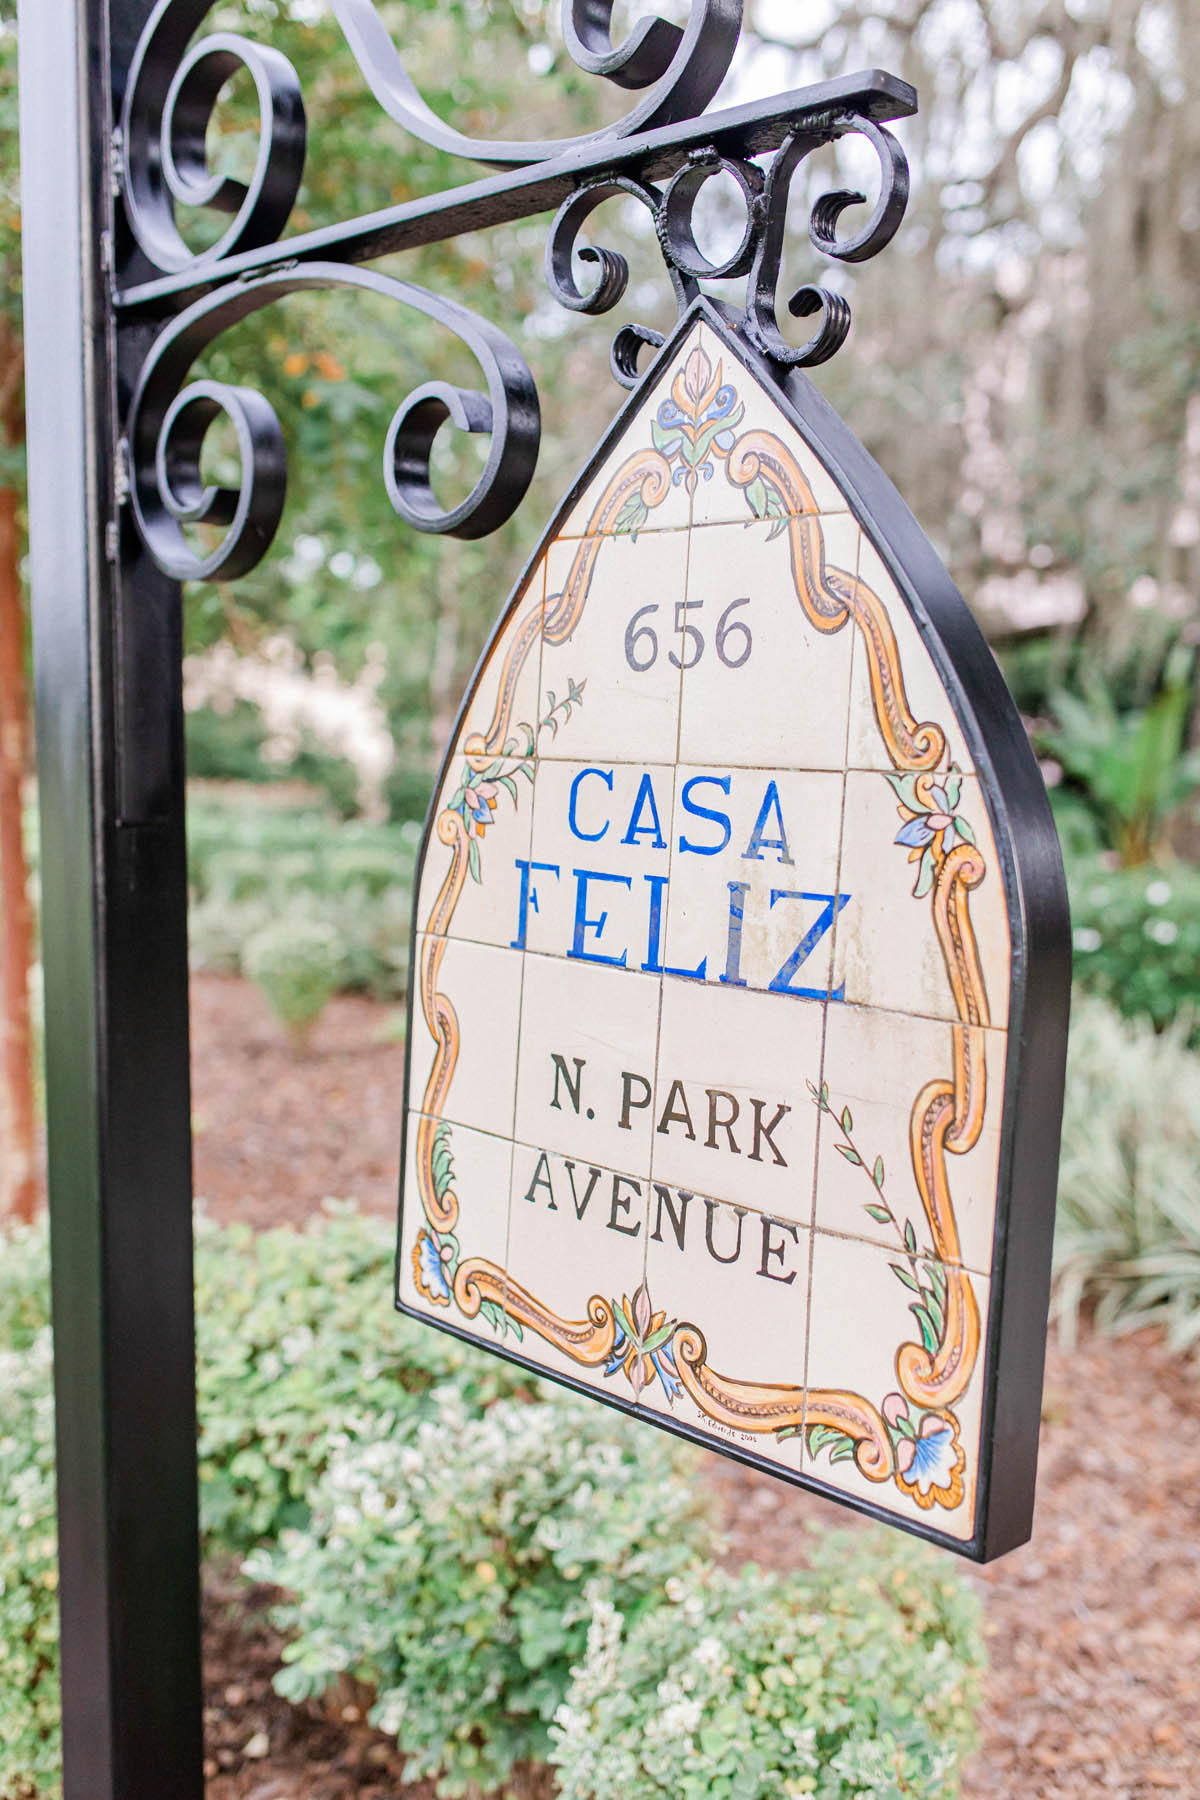 A tile sign hangs from a cast-iron post. The sign reads: 656 N. Park Avenue; Casa Feliz.